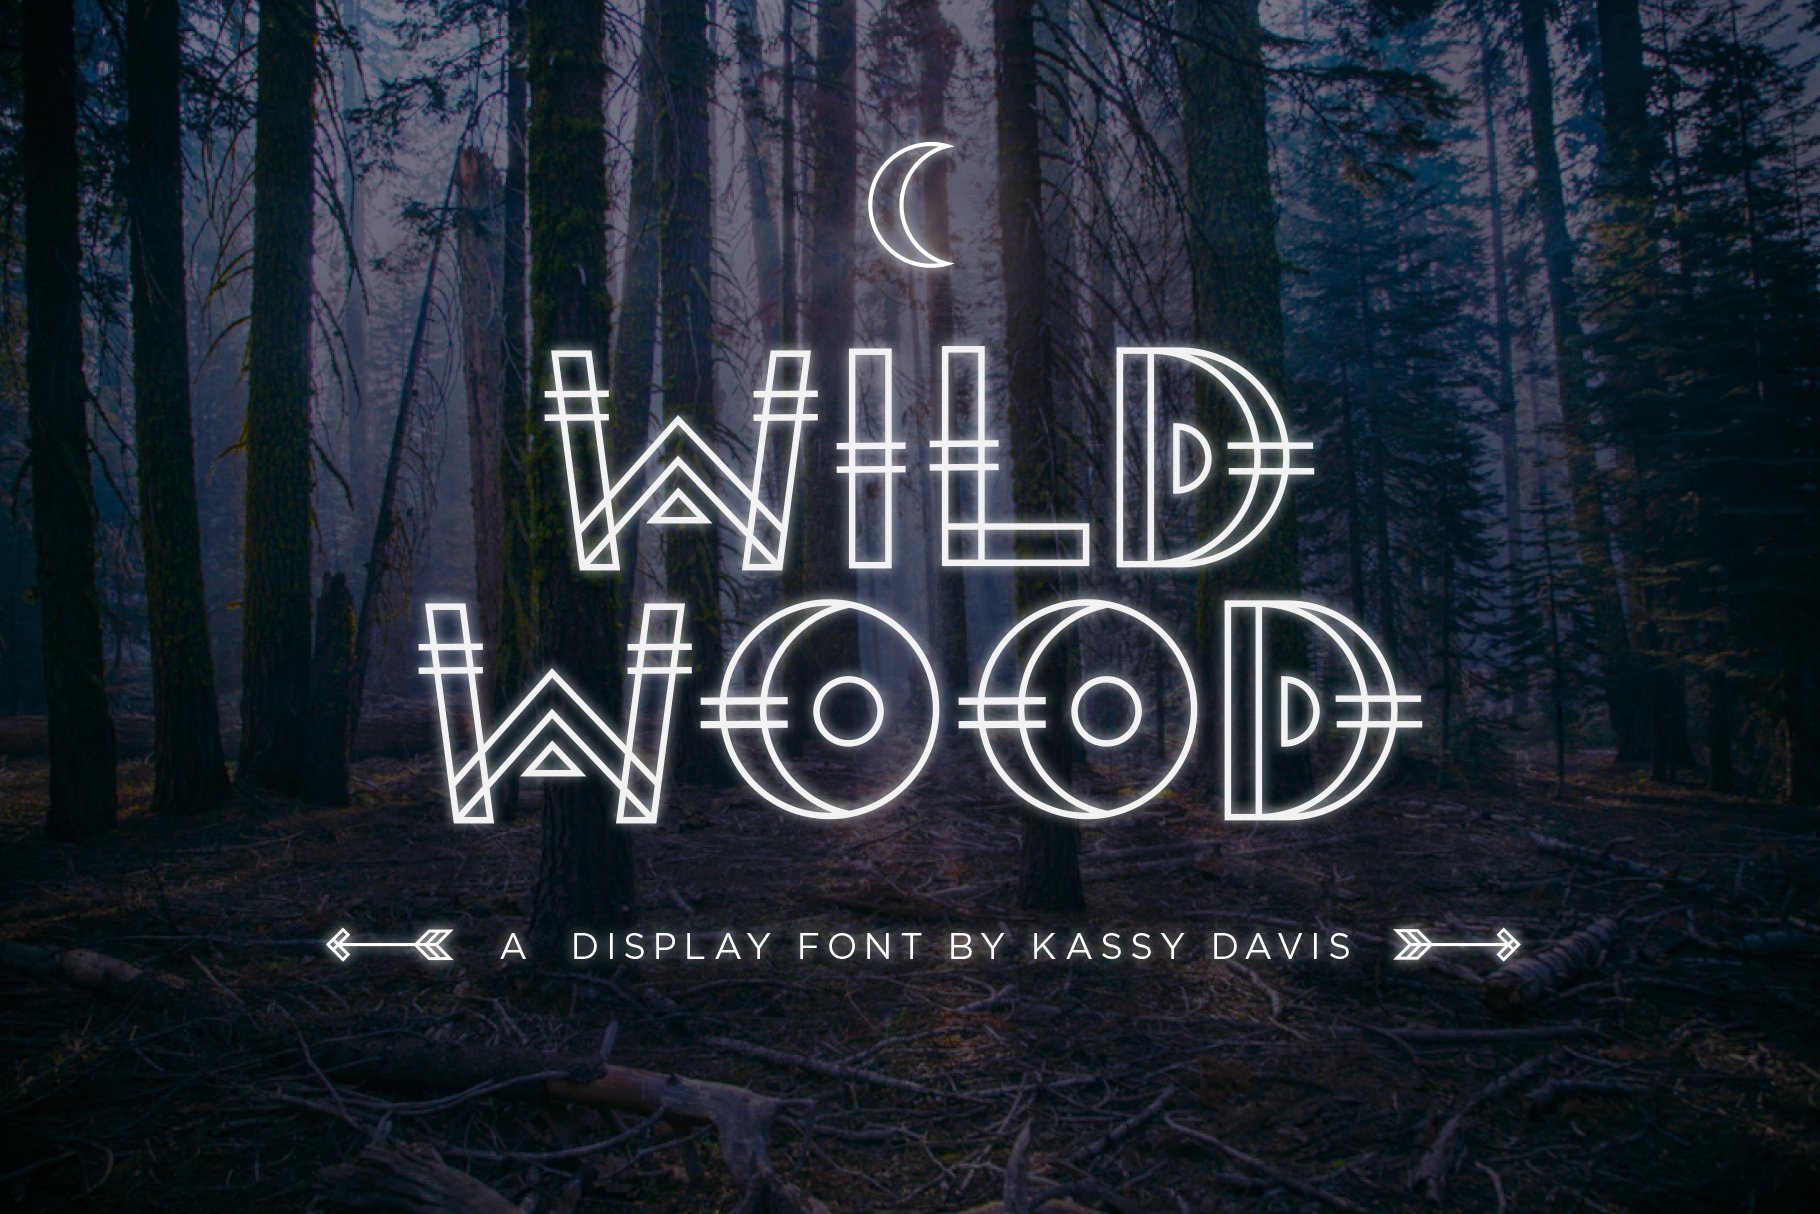 Wild Wood Font + Extras cover image.